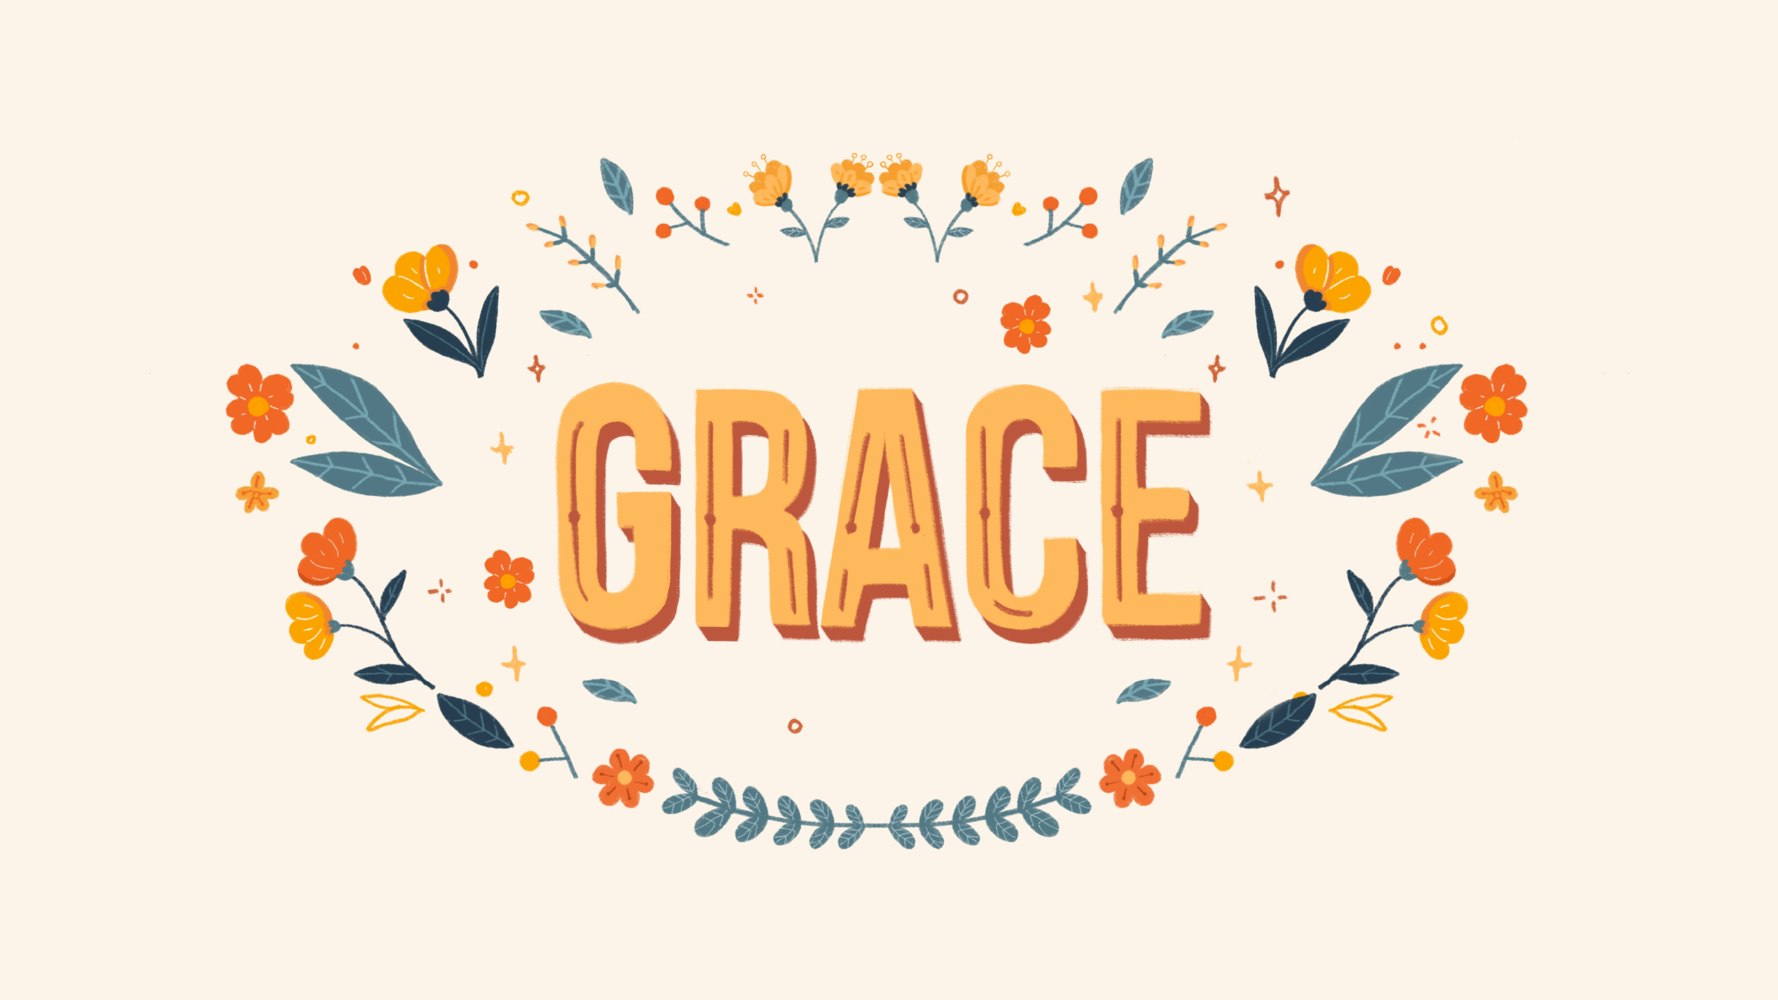 The word Grace circled by delicate flowers